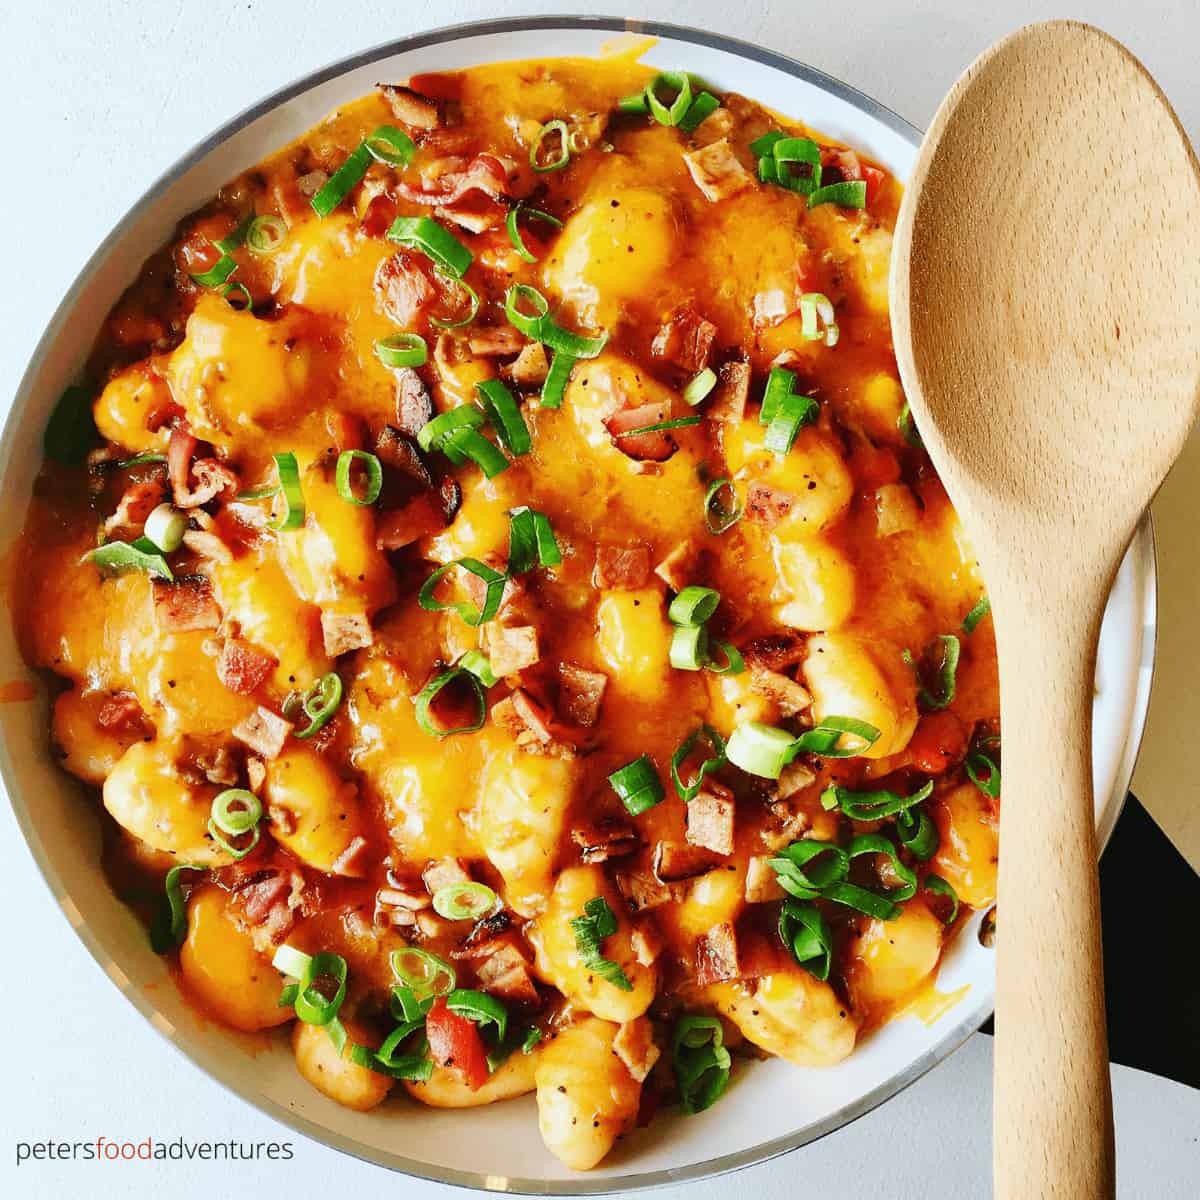 Your kids will LOVE this! The only way to eat gnocchi, an easy one pot wonder! Cheeseburger inspired with seasoned ground beef, bacon, tomatoes, red peppers, gooey melted cheddar cheese. Bacon Cheeseburger Gnocchi